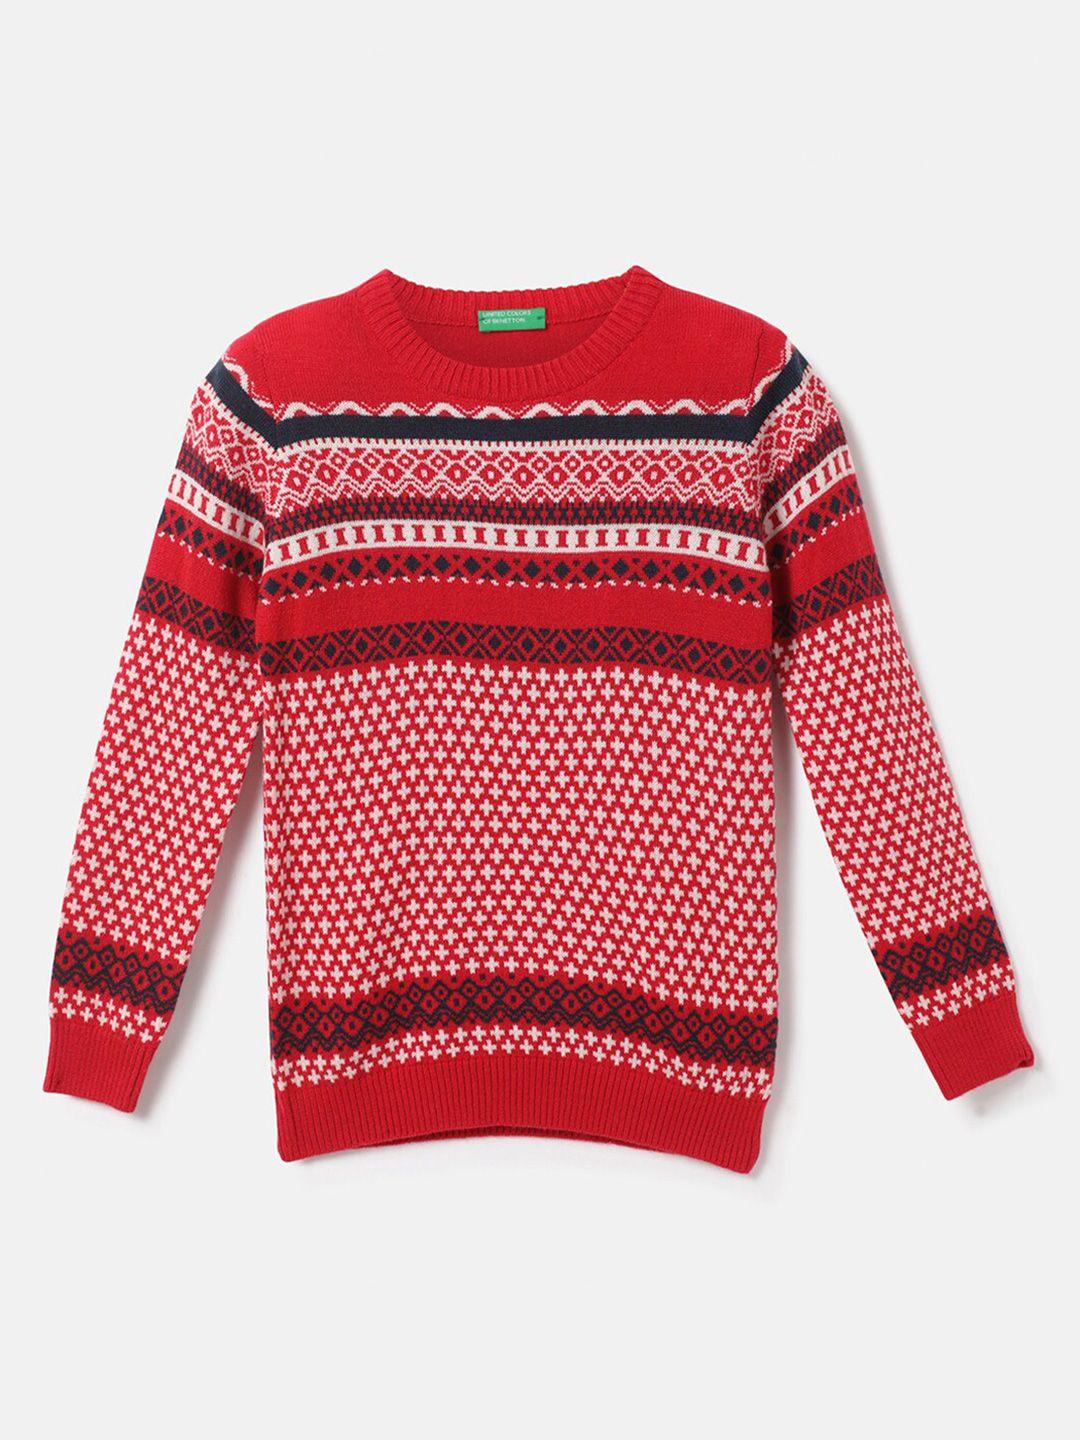 united-colors-of-benetton-boys-red-&-white-printed-pullover